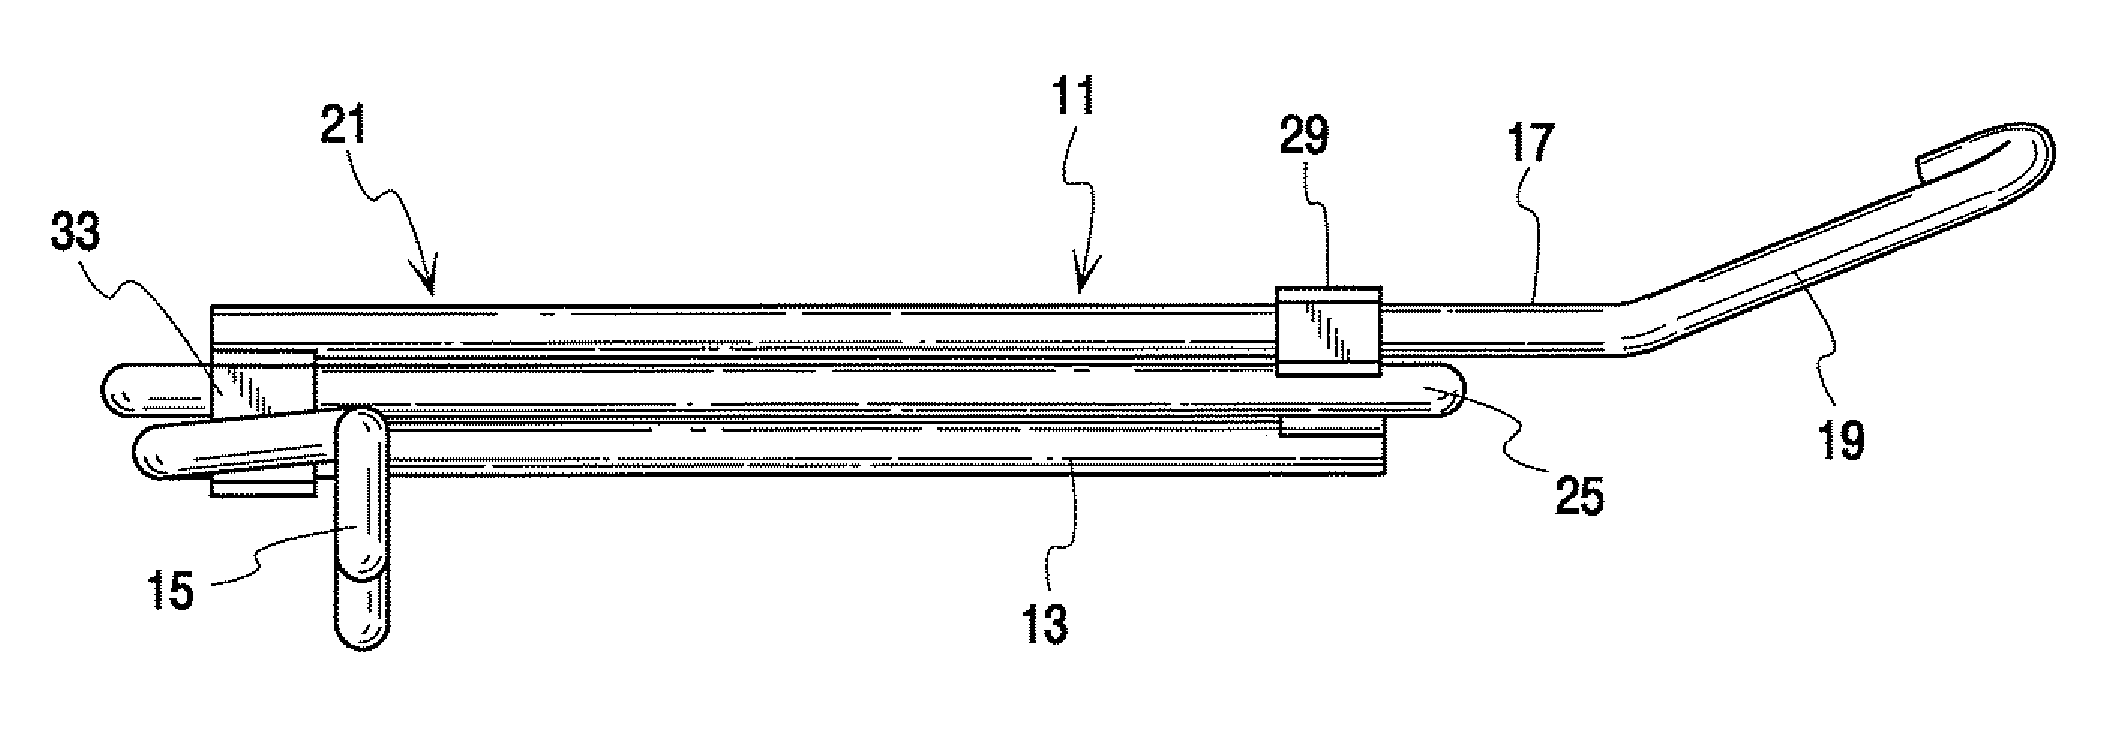 Telescoping, uncoupling lever and glide housings for a railroad car